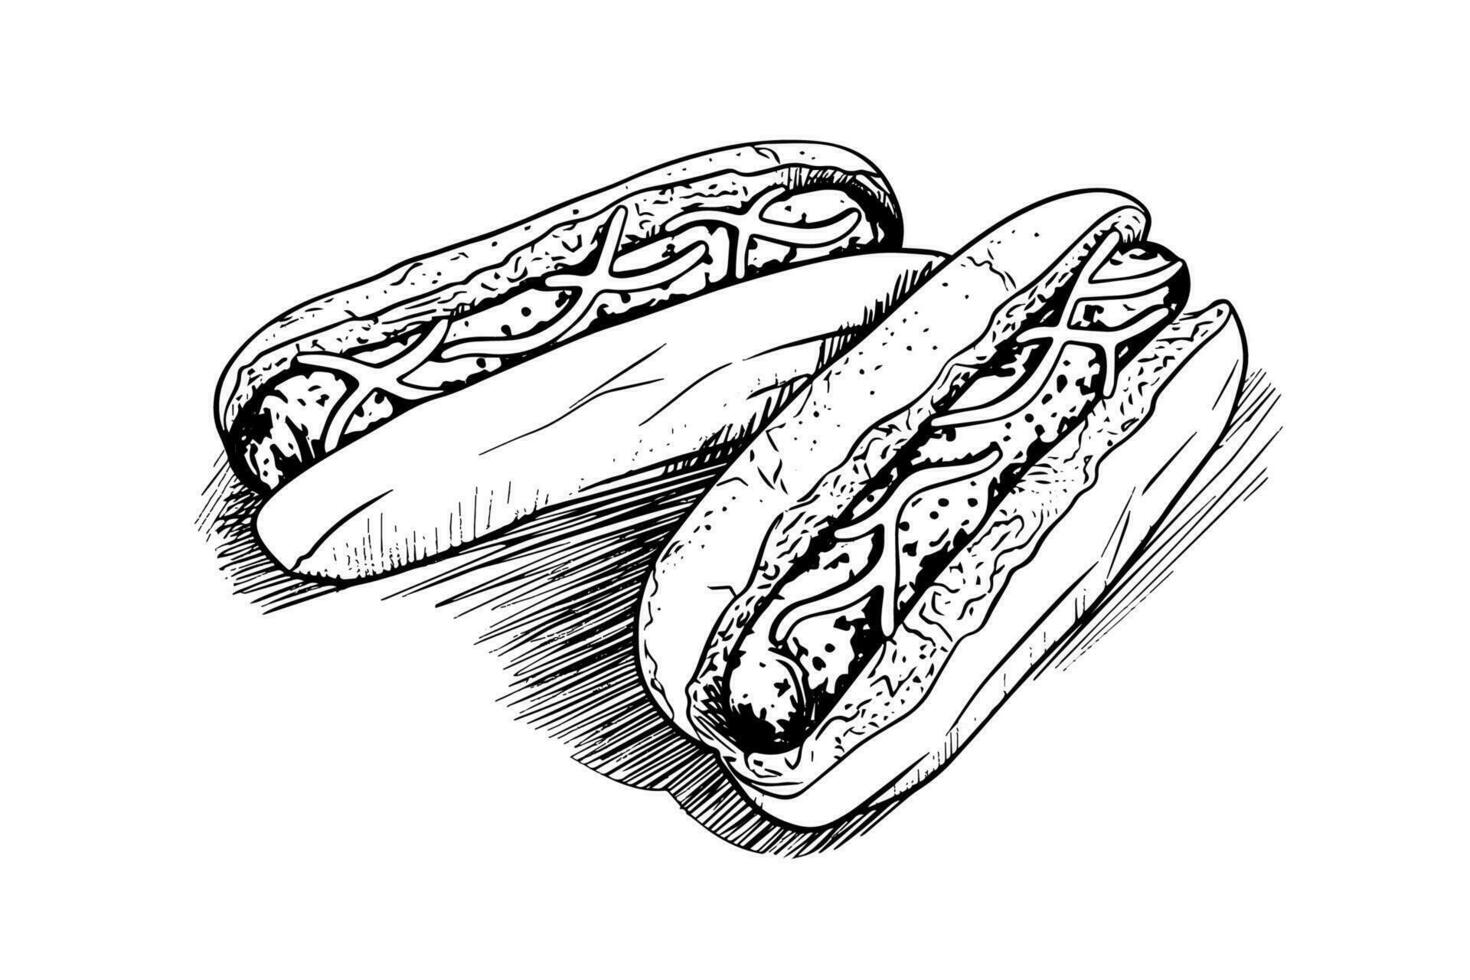 Two hot dog with sausage and sauce engraving sketch vector illustration.